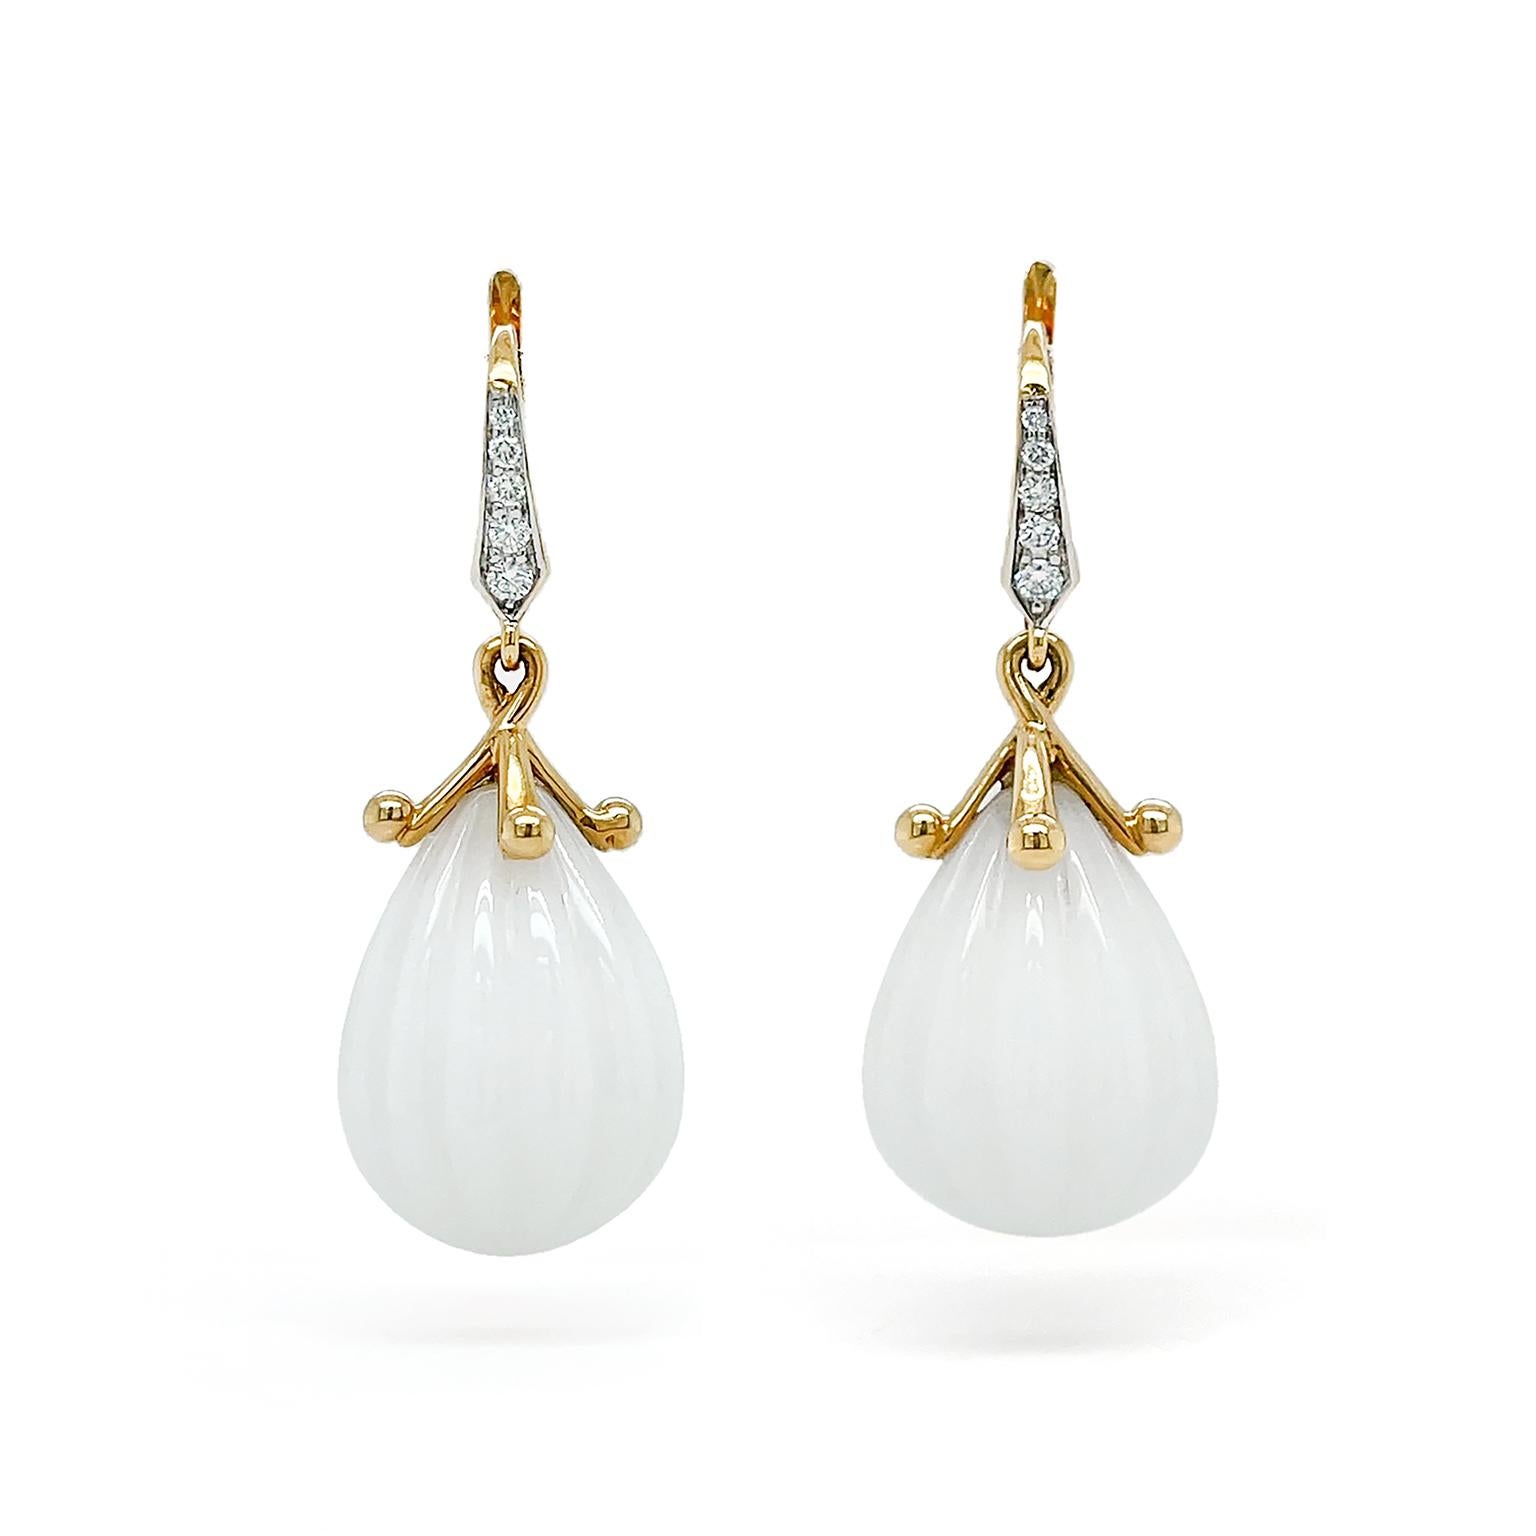 The soft iridescent light of white opal illuminates these earrings. 18k yellow gold lever backs with pave set brilliant cut diamonds feature gold caps with miniature orbs at the tips. Suspending from this is a teardrop cut of white opal with carved